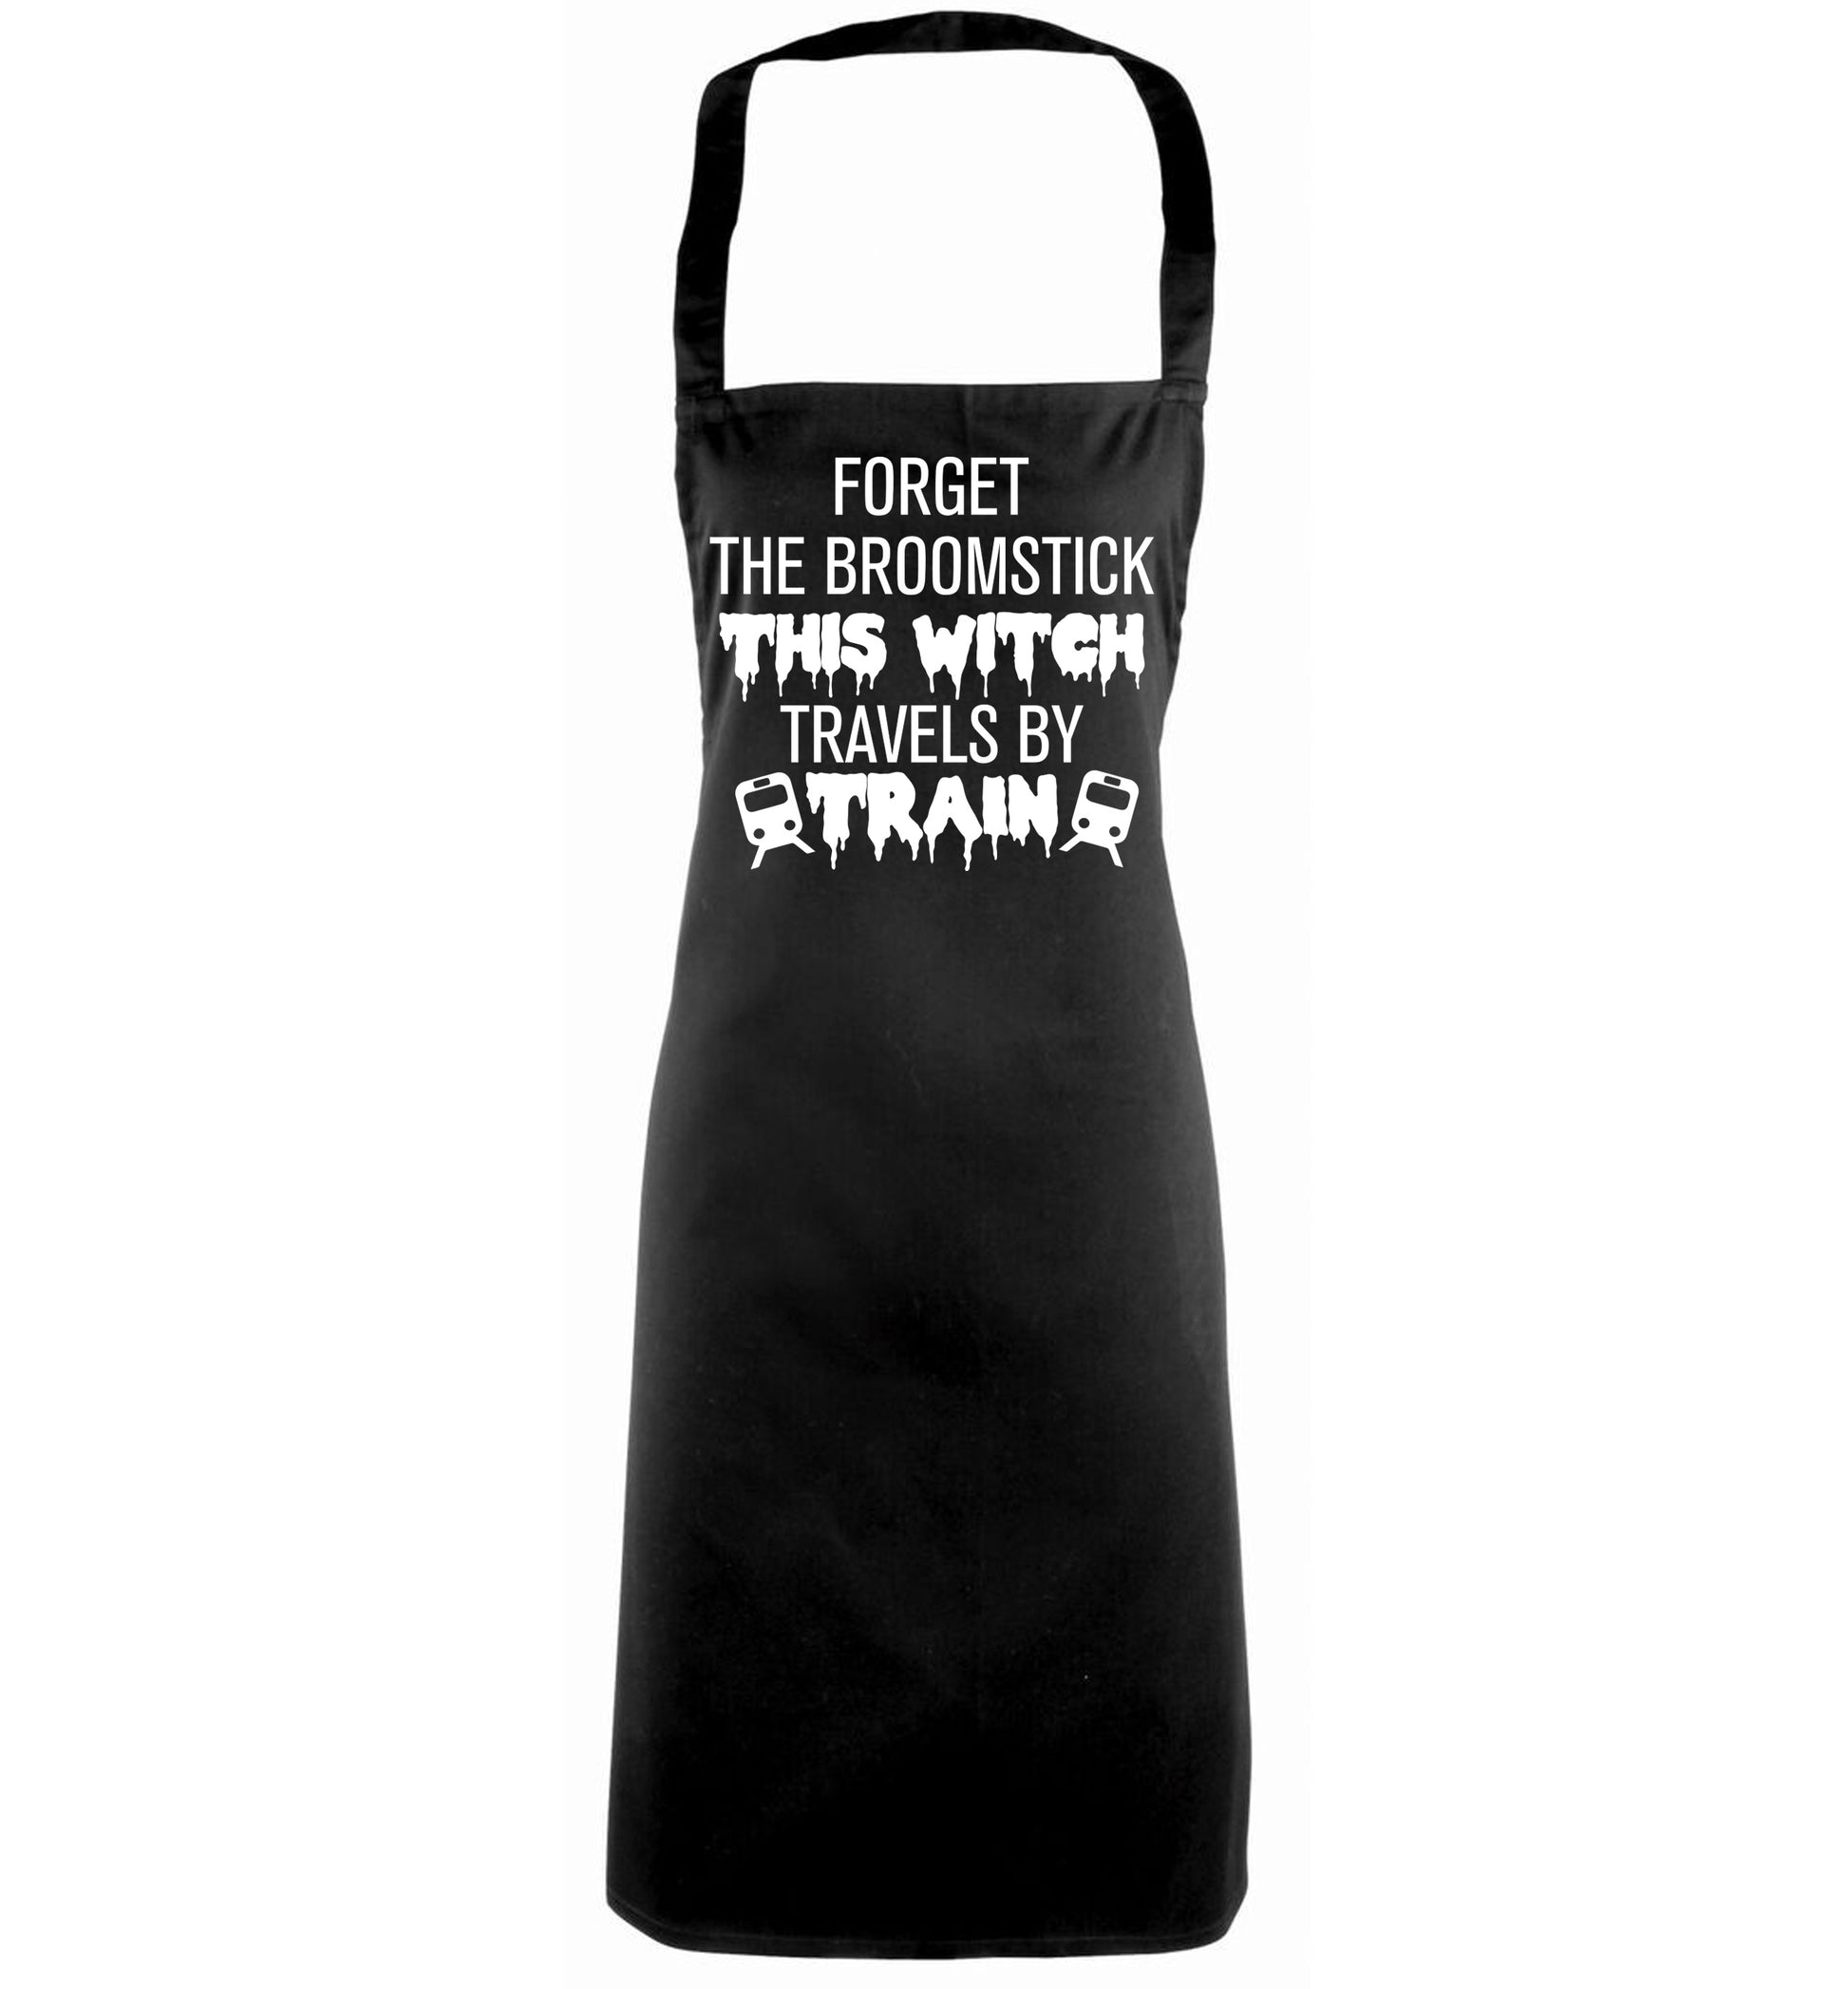 Forget the broomstick this witch travels by train black apron